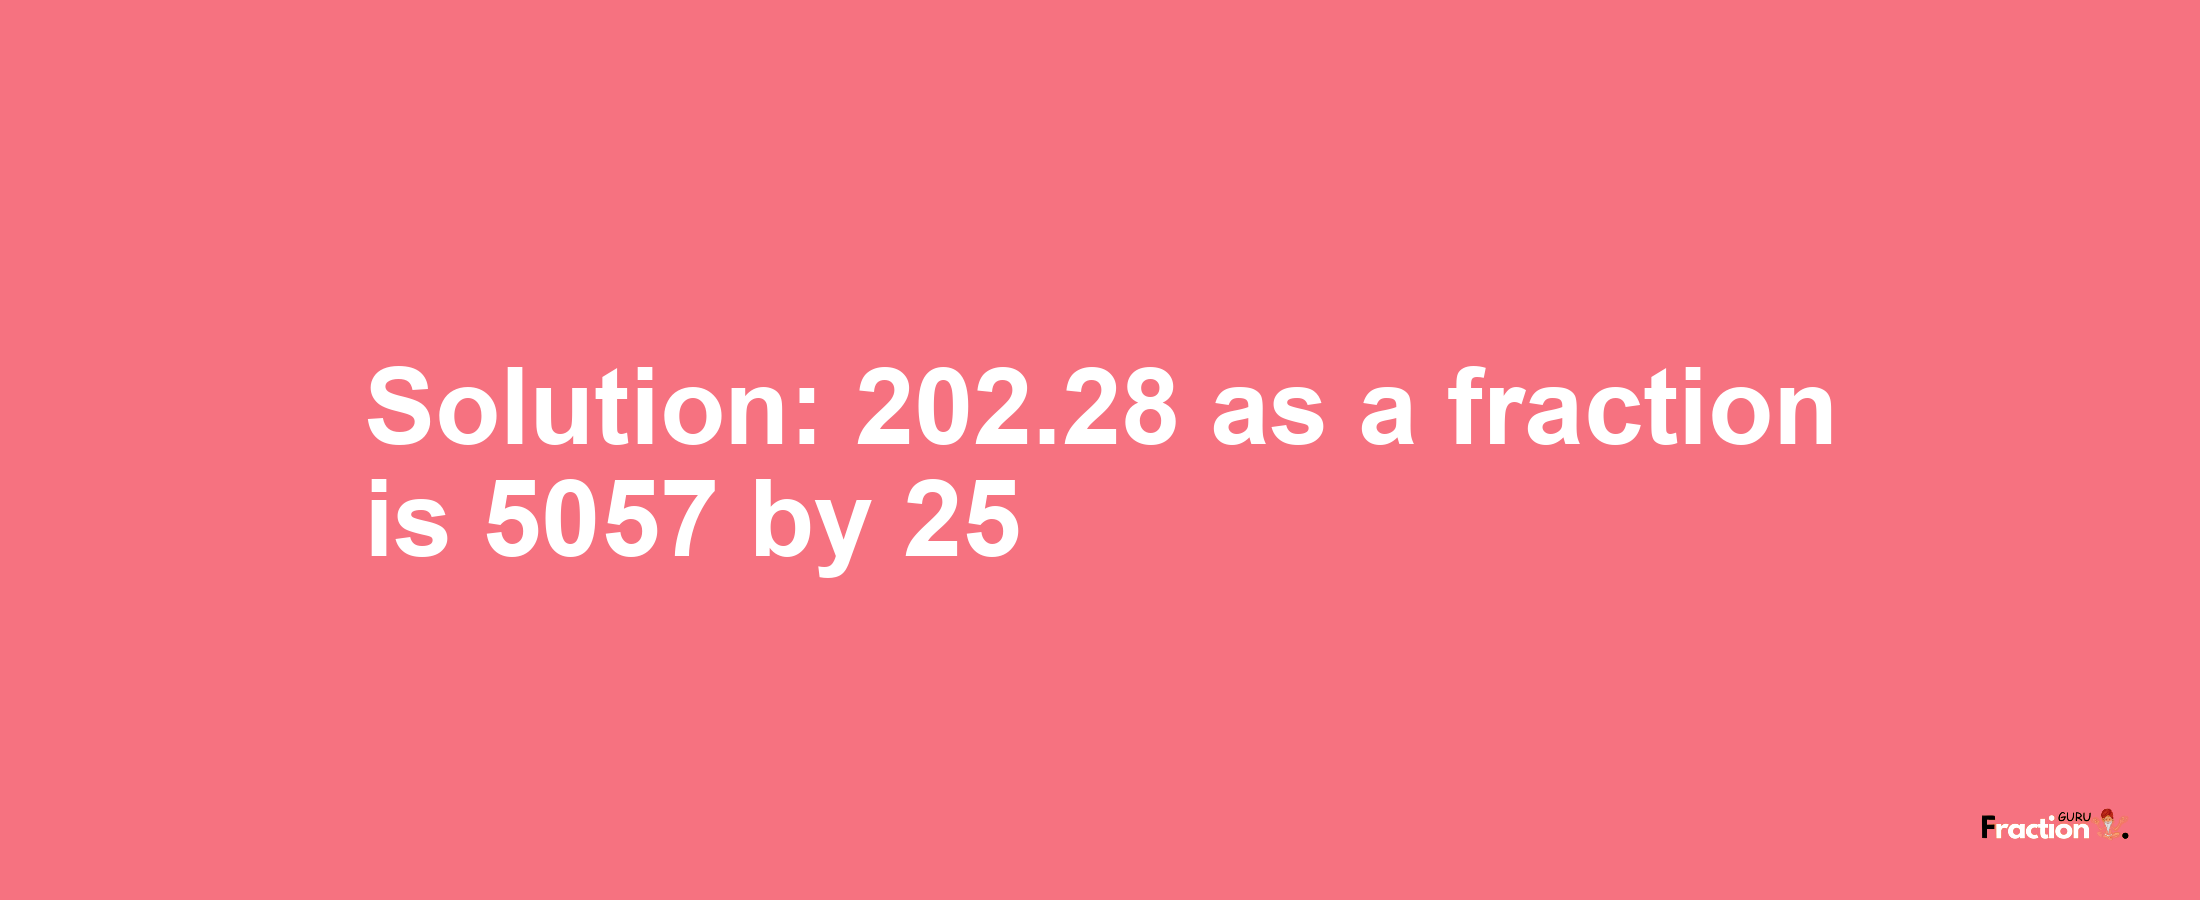 Solution:202.28 as a fraction is 5057/25